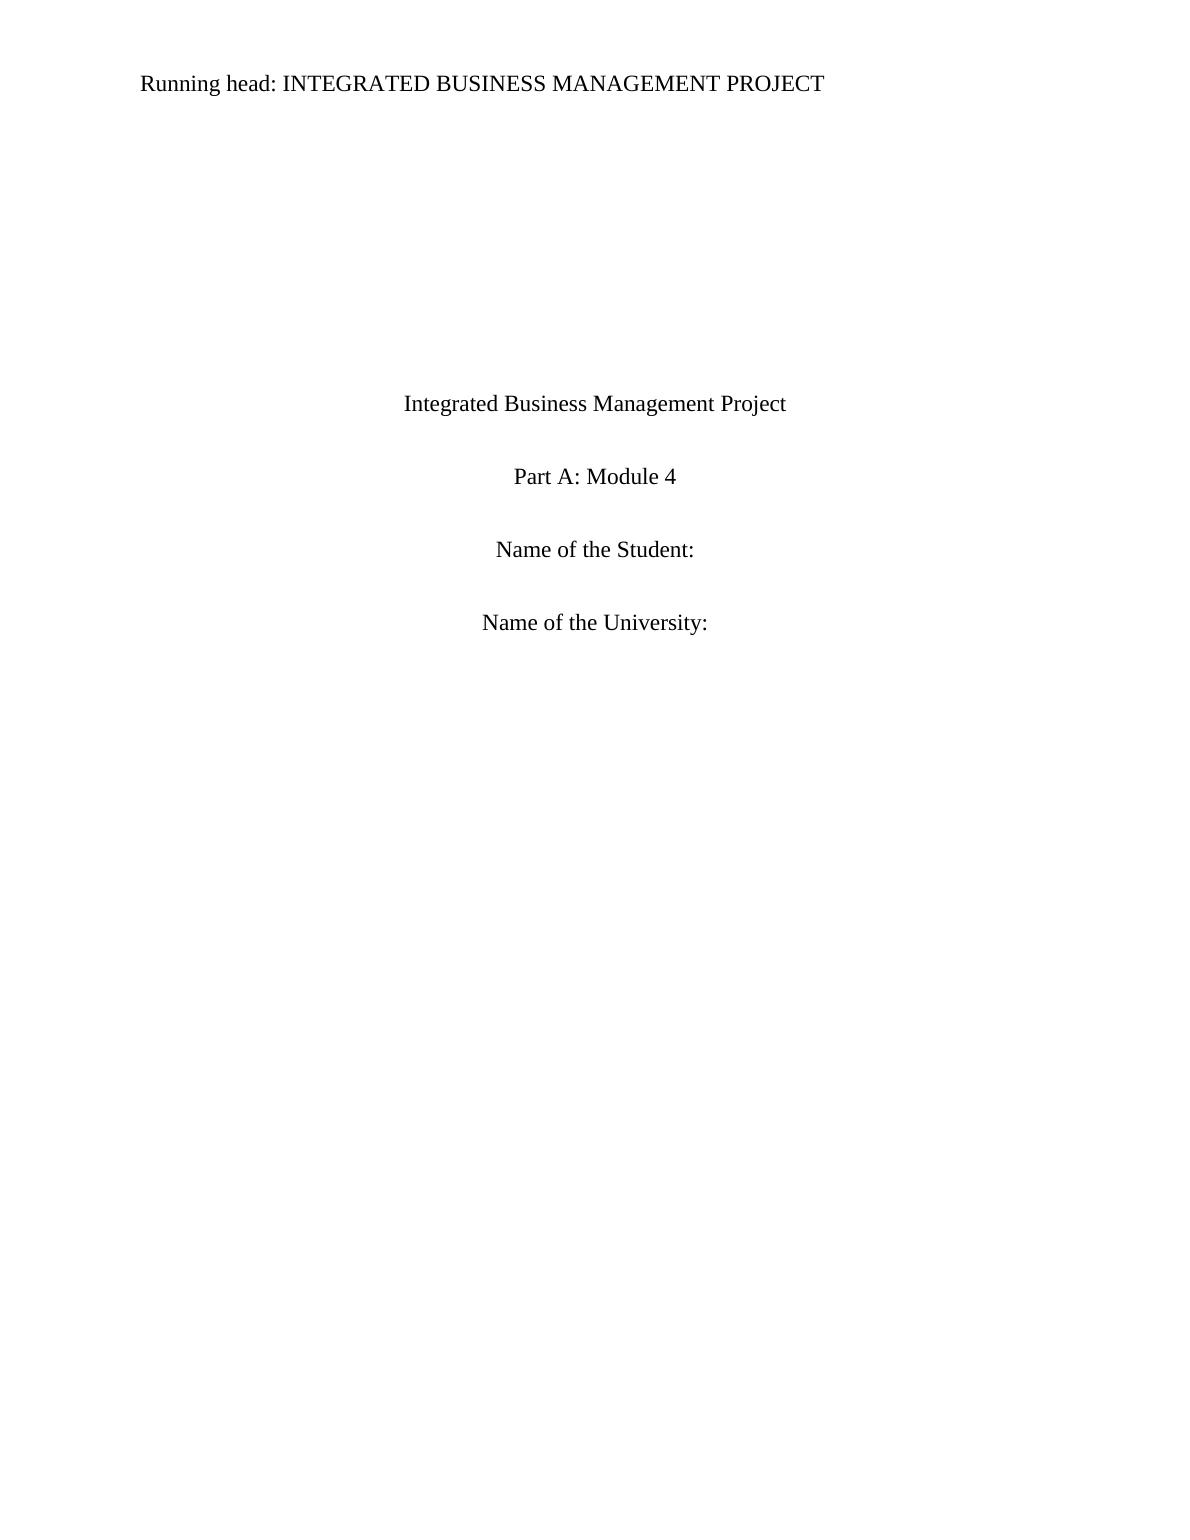 Integrated Business Management Project_1